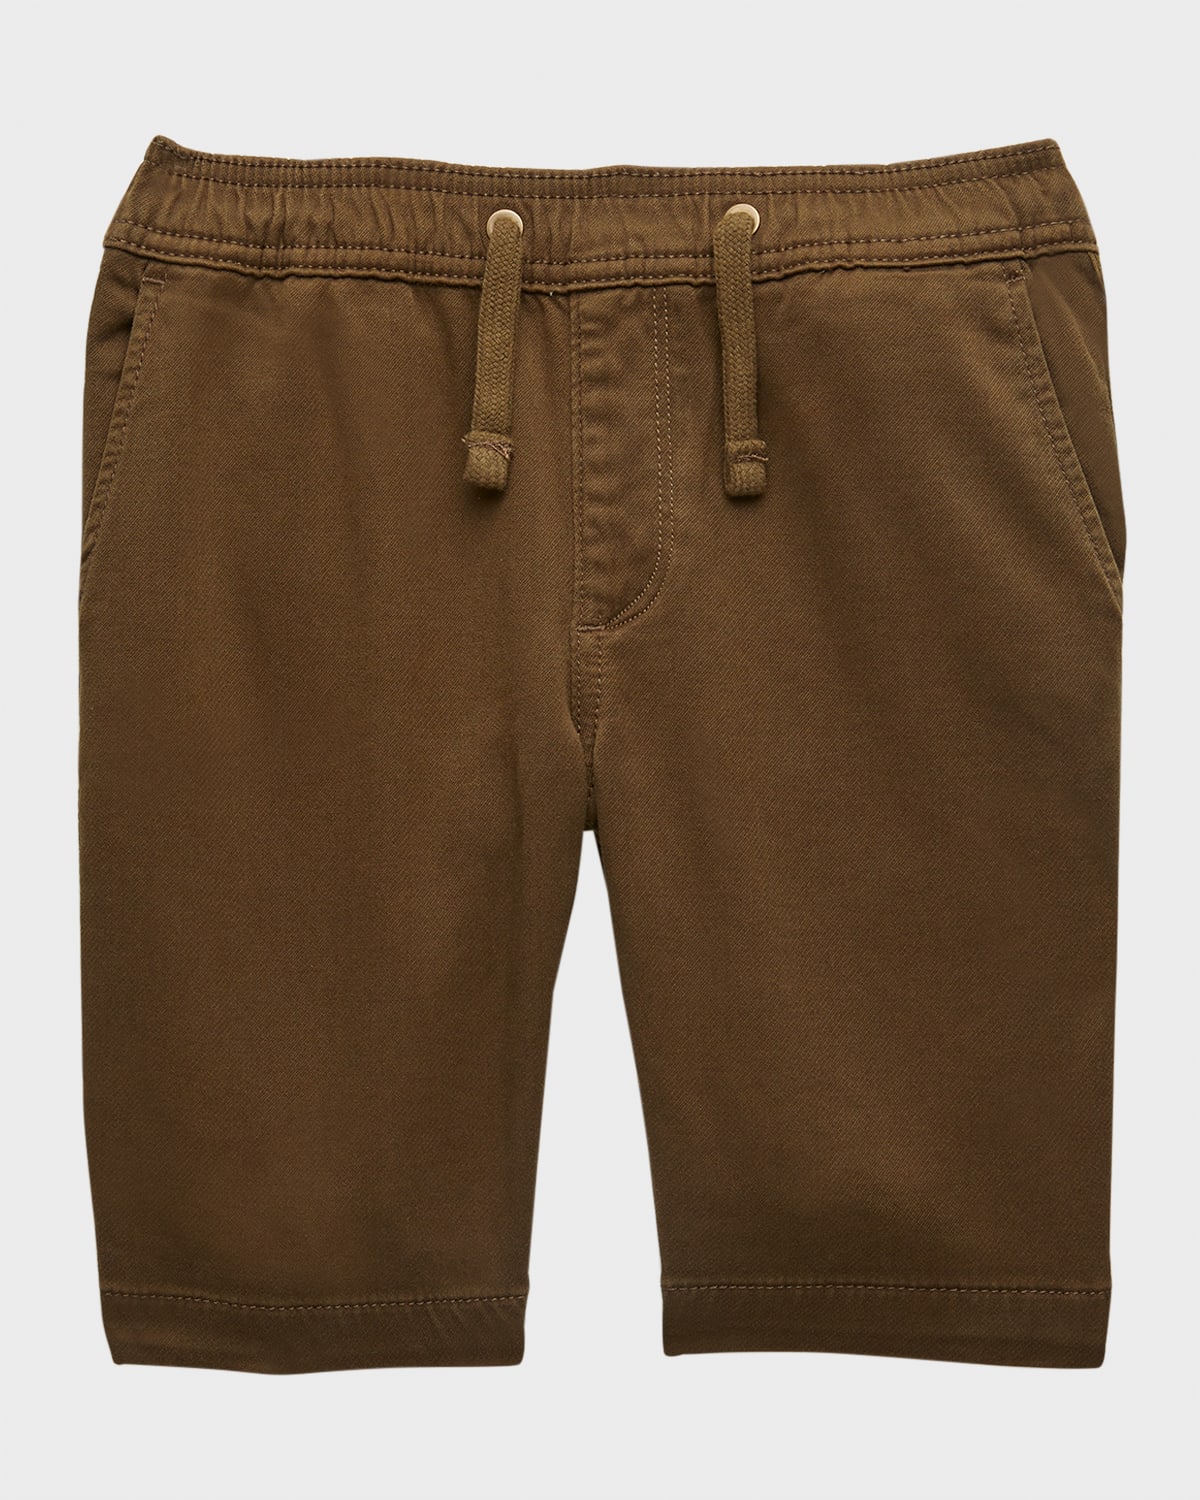 DL1961 BOY'S EMBROIDERED JACKSON SHORTS